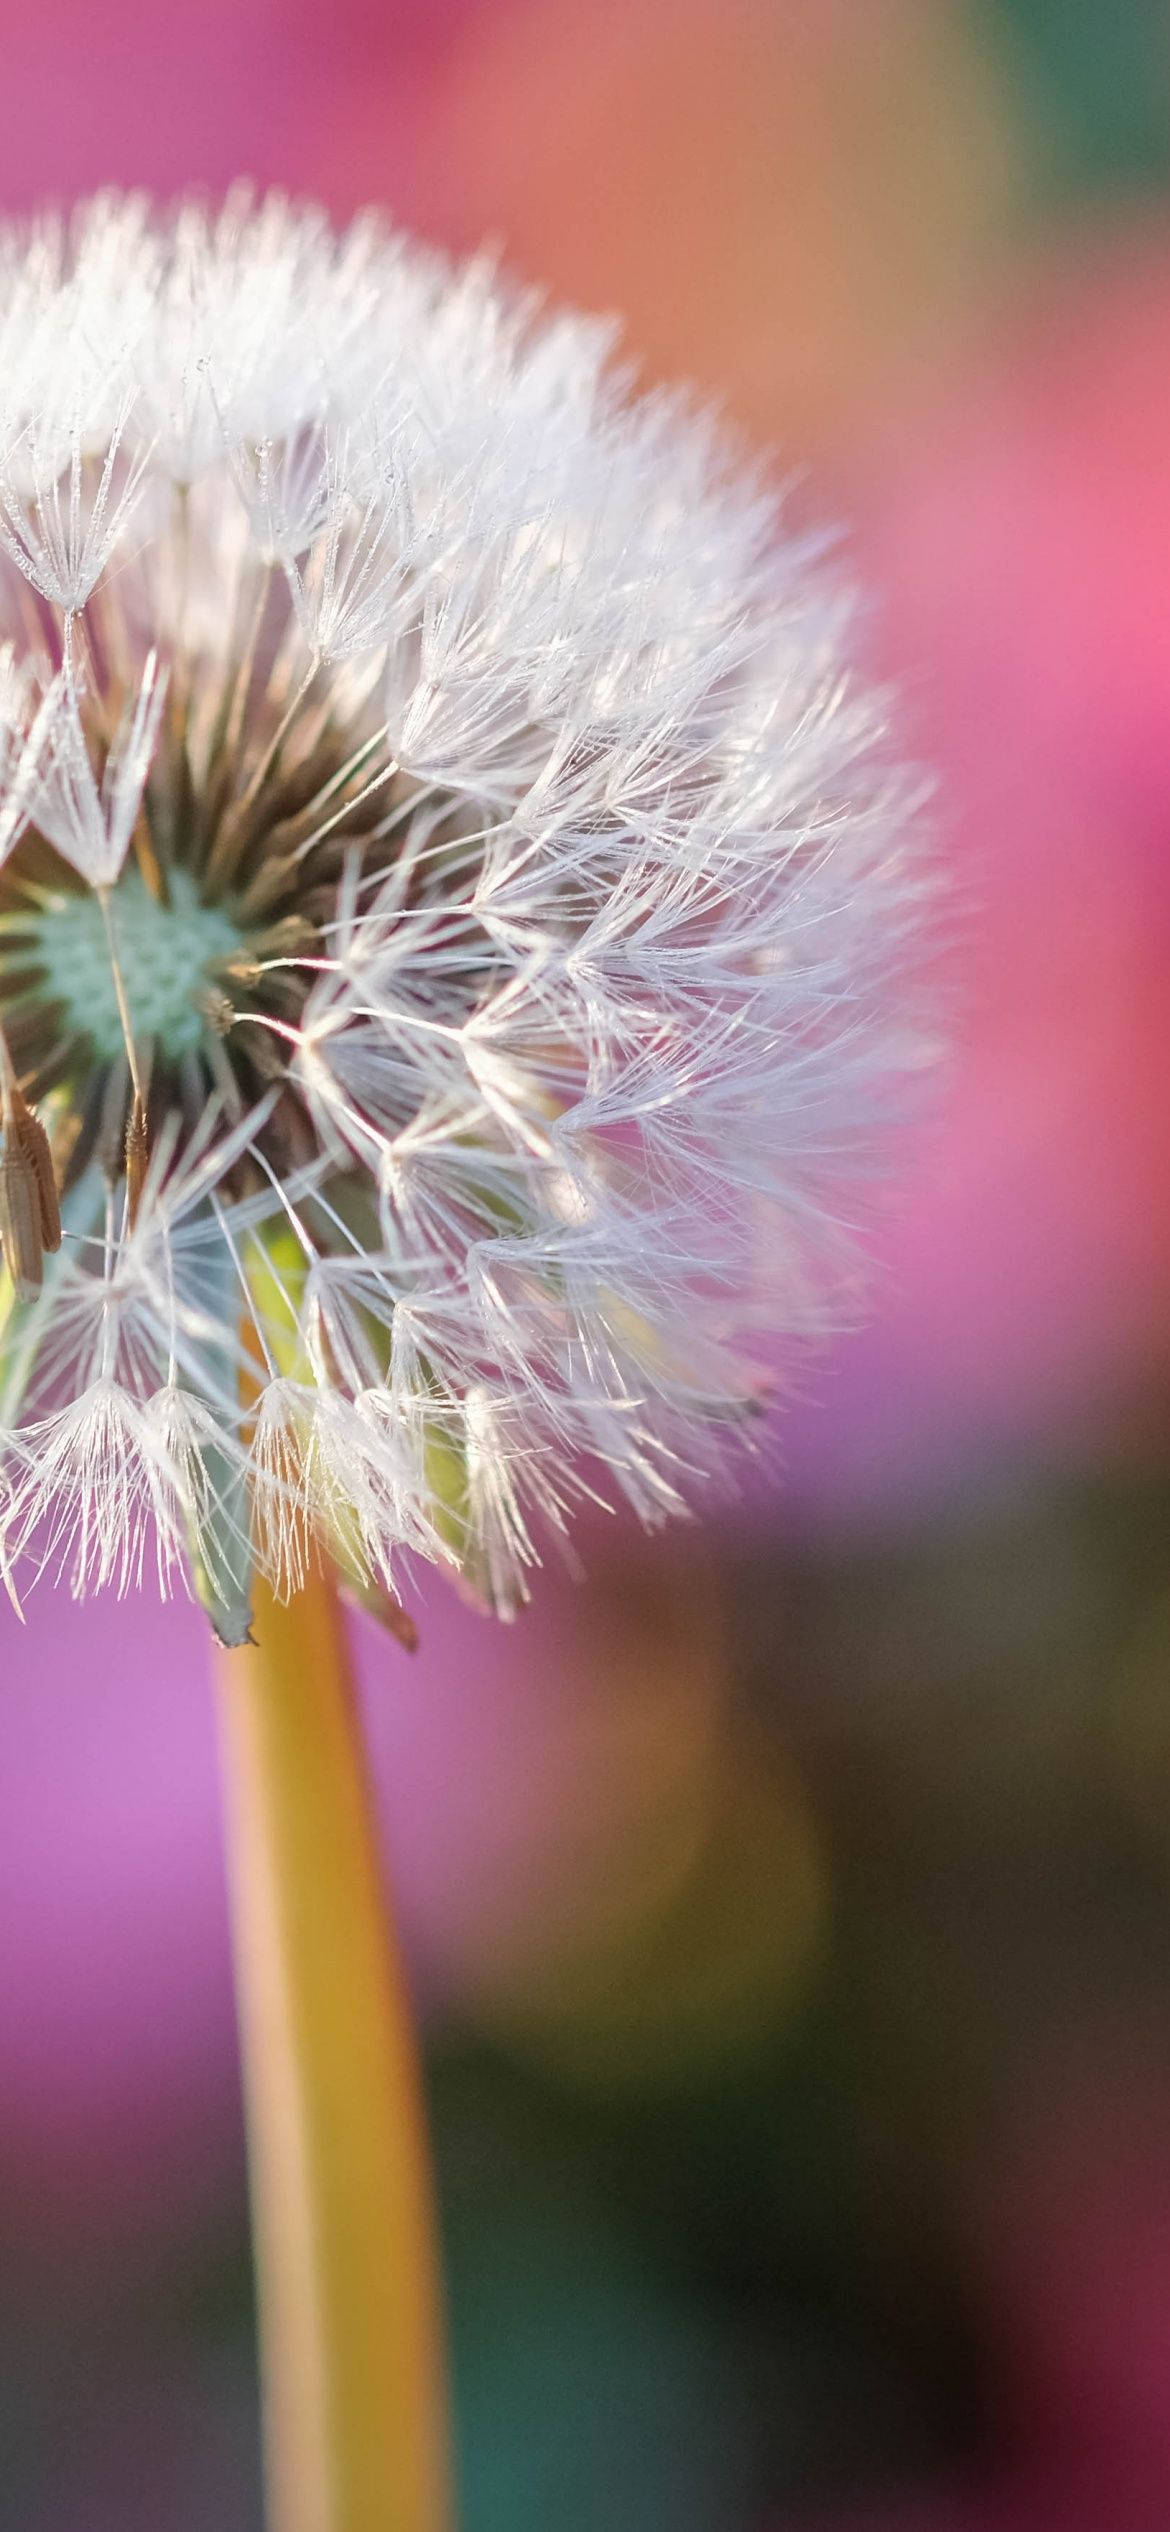 A dandelion in front of a colorful background. - Dandelions